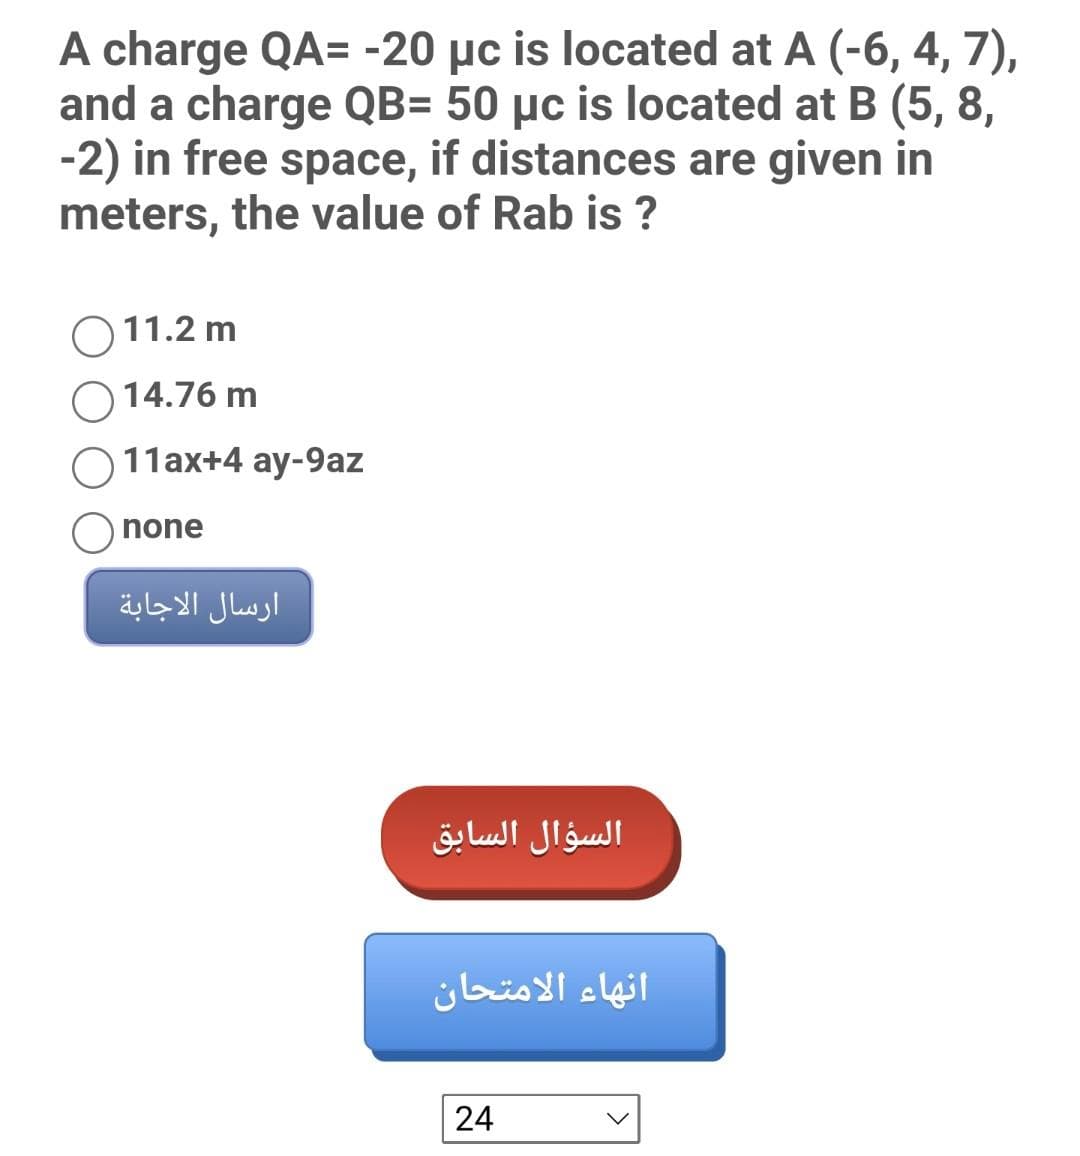 A charge QA= -20 µc is located at A (-6, 4, 7),
and a charge QB= 50 µc is located at B (5, 8,
-2) in free space, if distances are given in
meters, the value of Rab is ?
O 11.2 m
14.76 m
11ax+4 ay-9az
none
ارسال الاجابة
السؤال السابق
انهاء الامتحان
24